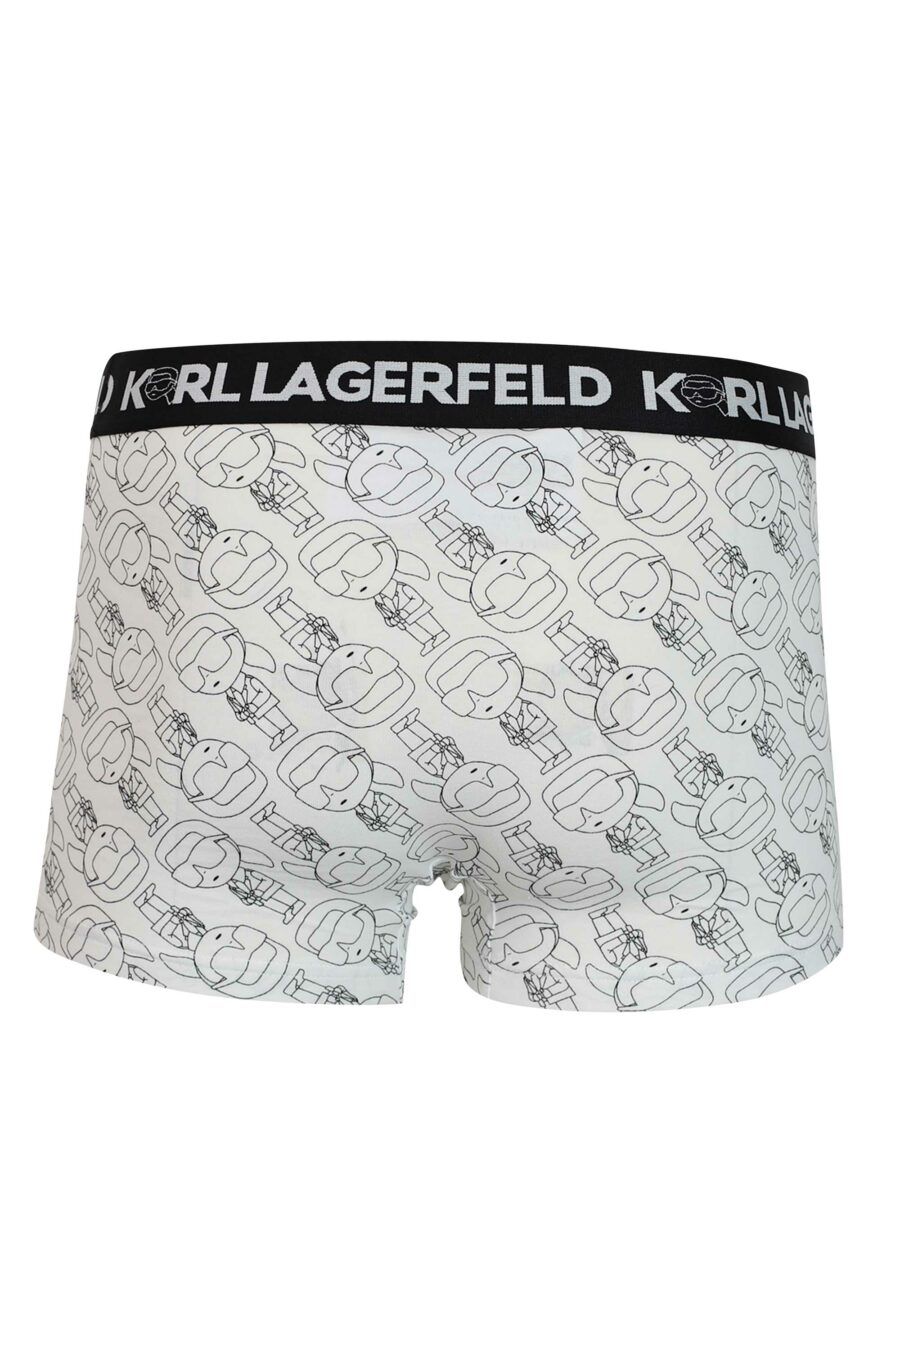 Pack of three black boxers with different "karl" prints - 8720744054580 4